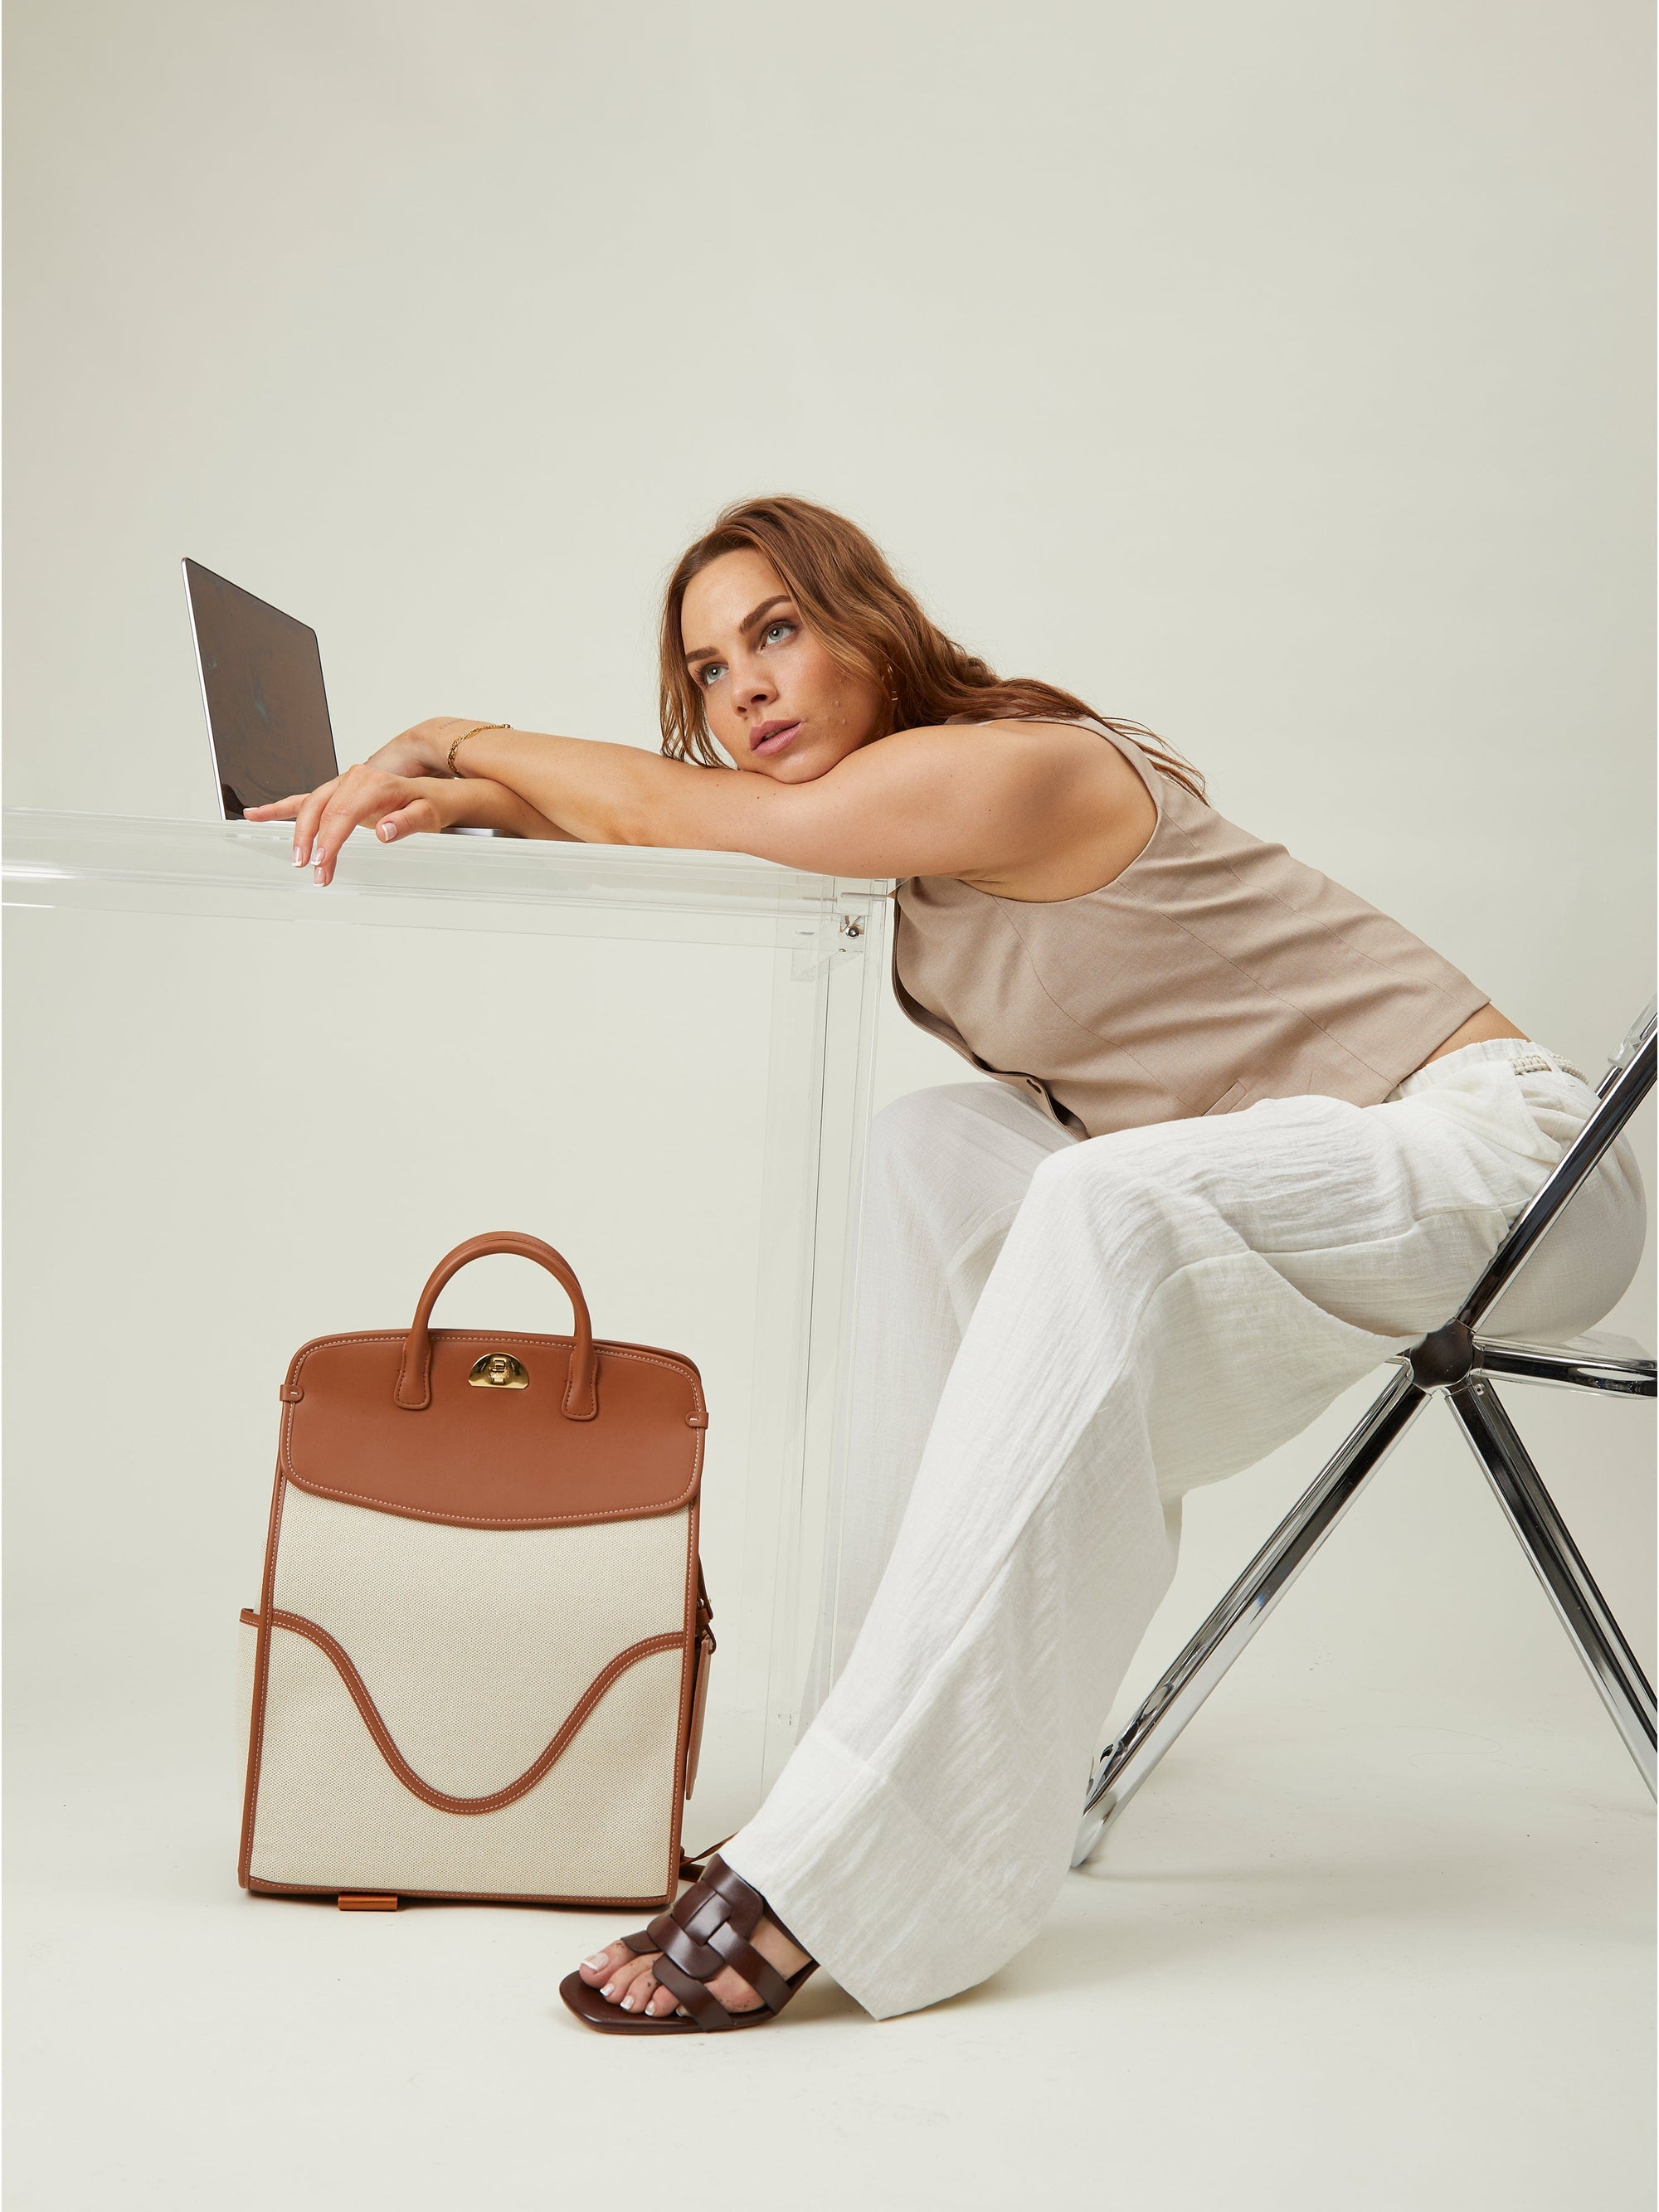 OLEADA Women Work Bag > Leather Bag > Business Travel Backpack > Fits Up To 14'' Laptops Coast Backpack Sand